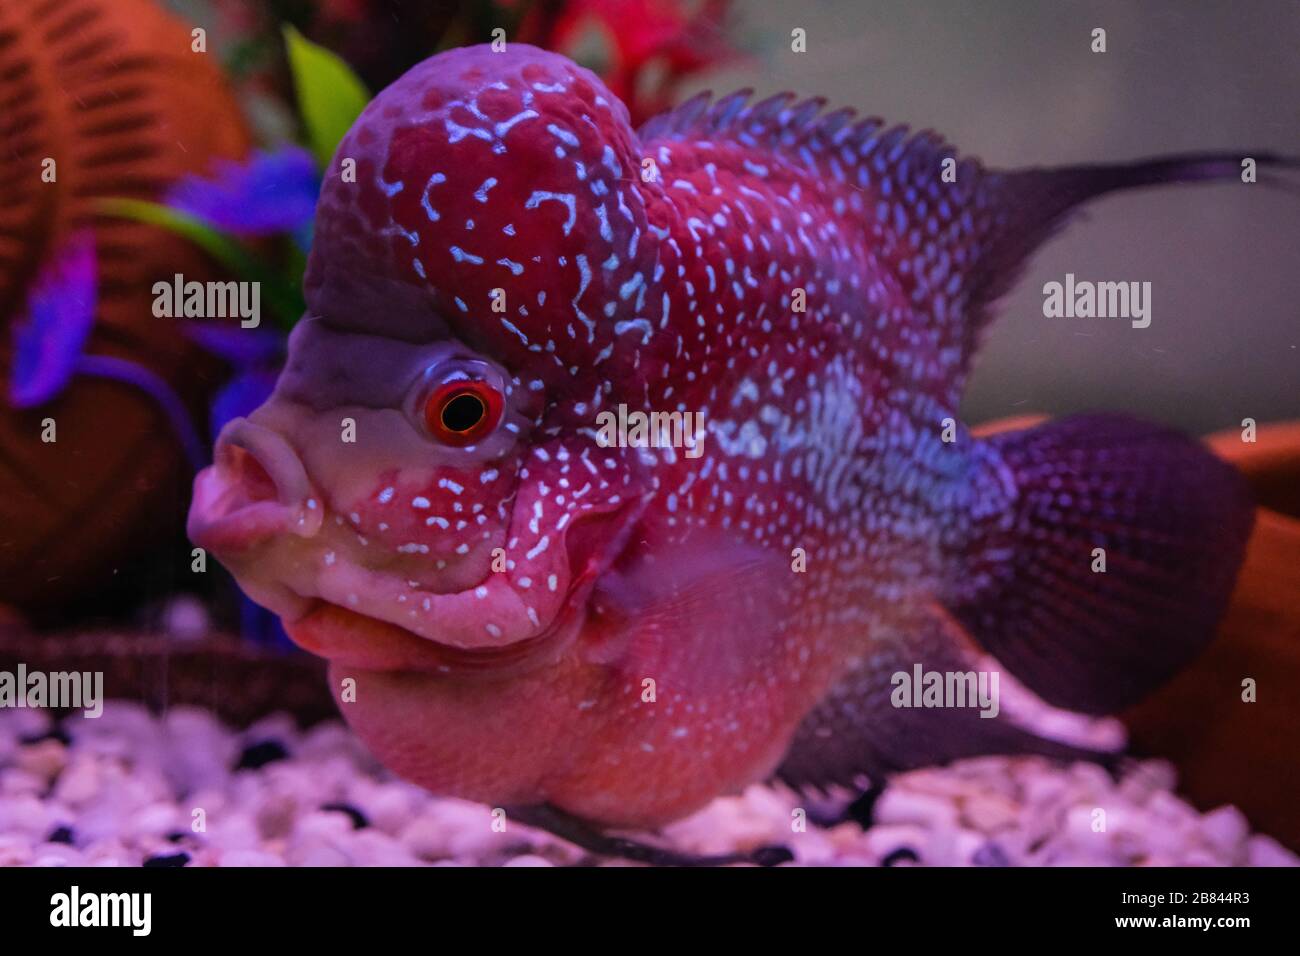 The Flowerhorn Fish Aquarium Fish Flower horn Fish Flowerhorn Cichlid Fish isolated on white background This has clipping path. Stock Photo